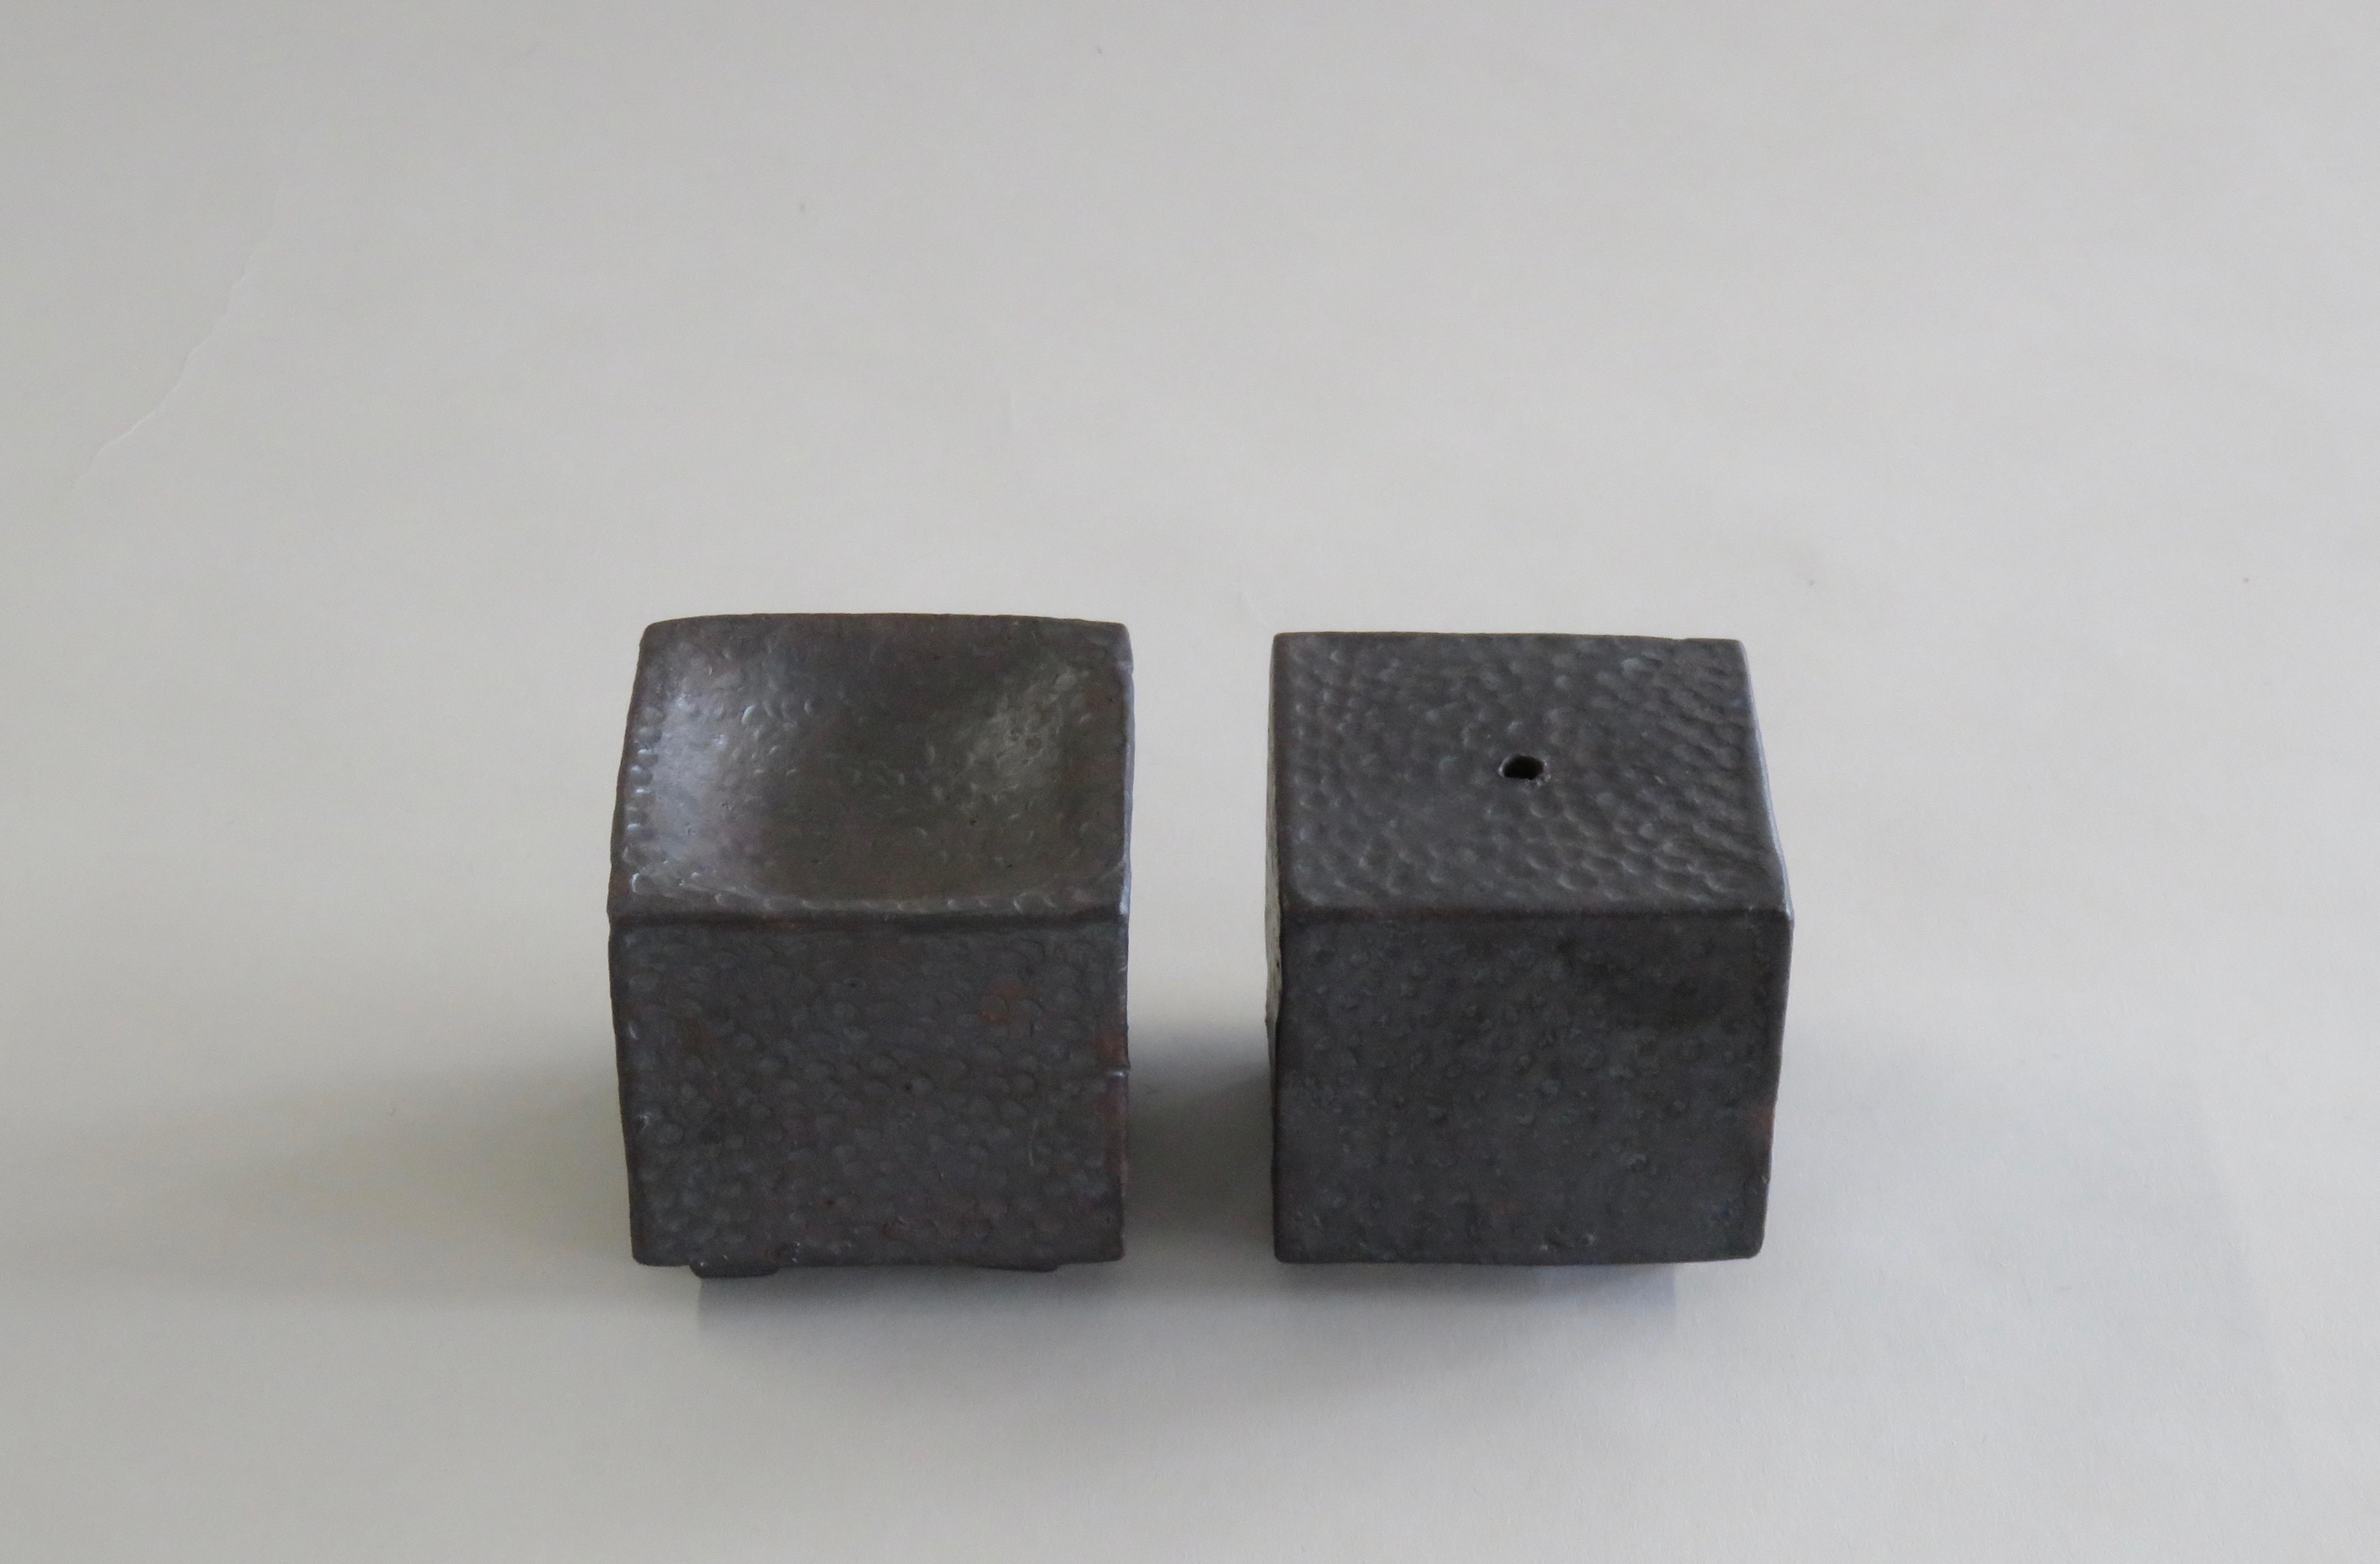 Contemporary Small Ceramic Contemplation Cube, Mottled Surface in Metallic Black-Brown Glaze